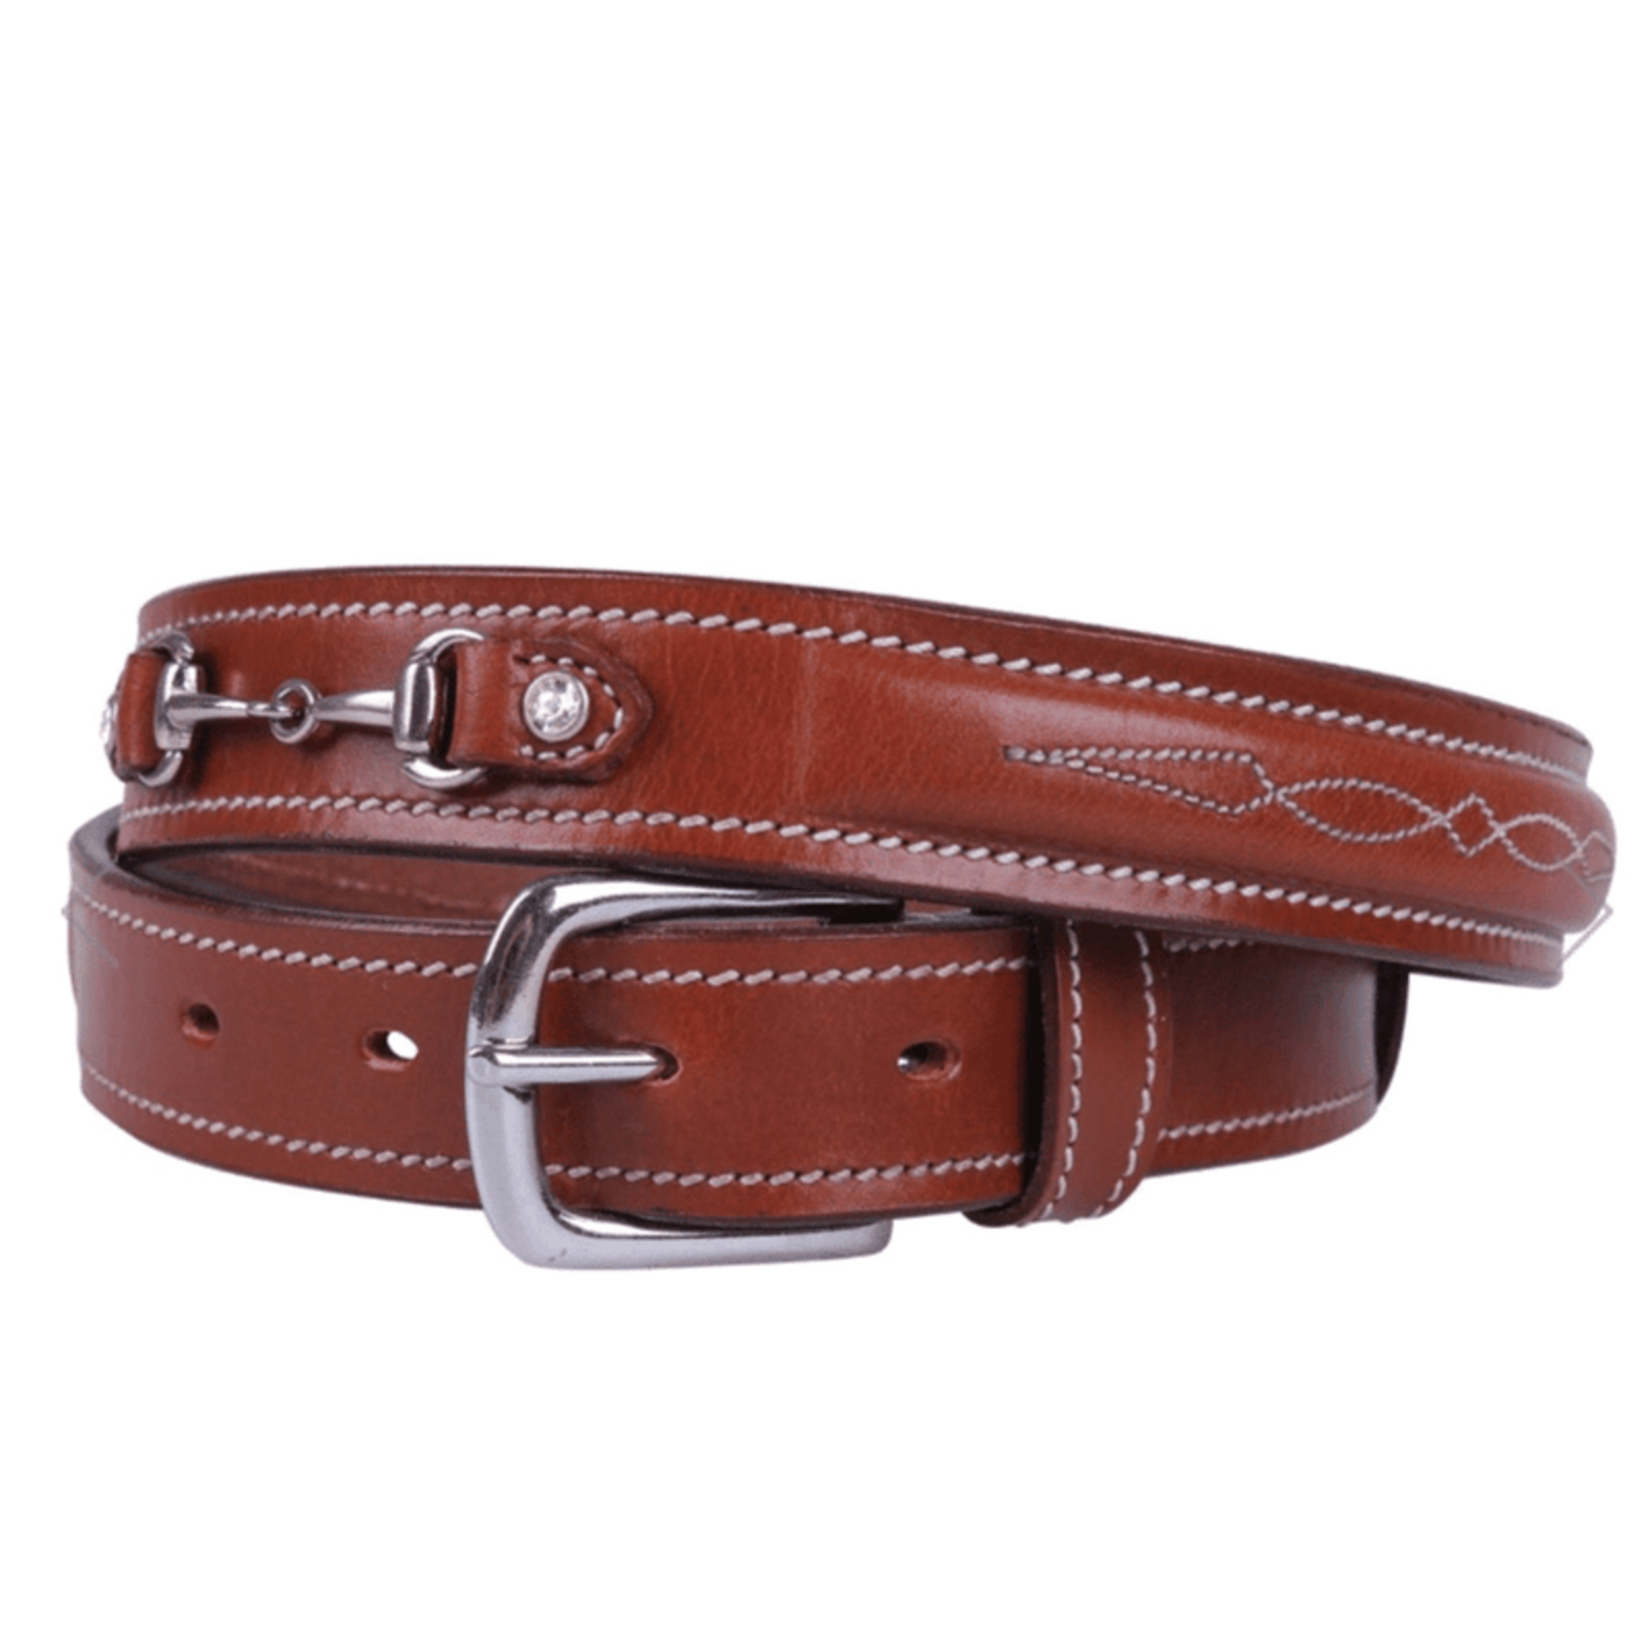 Horses and Lifestyle Equestrian style belts 4 Colors